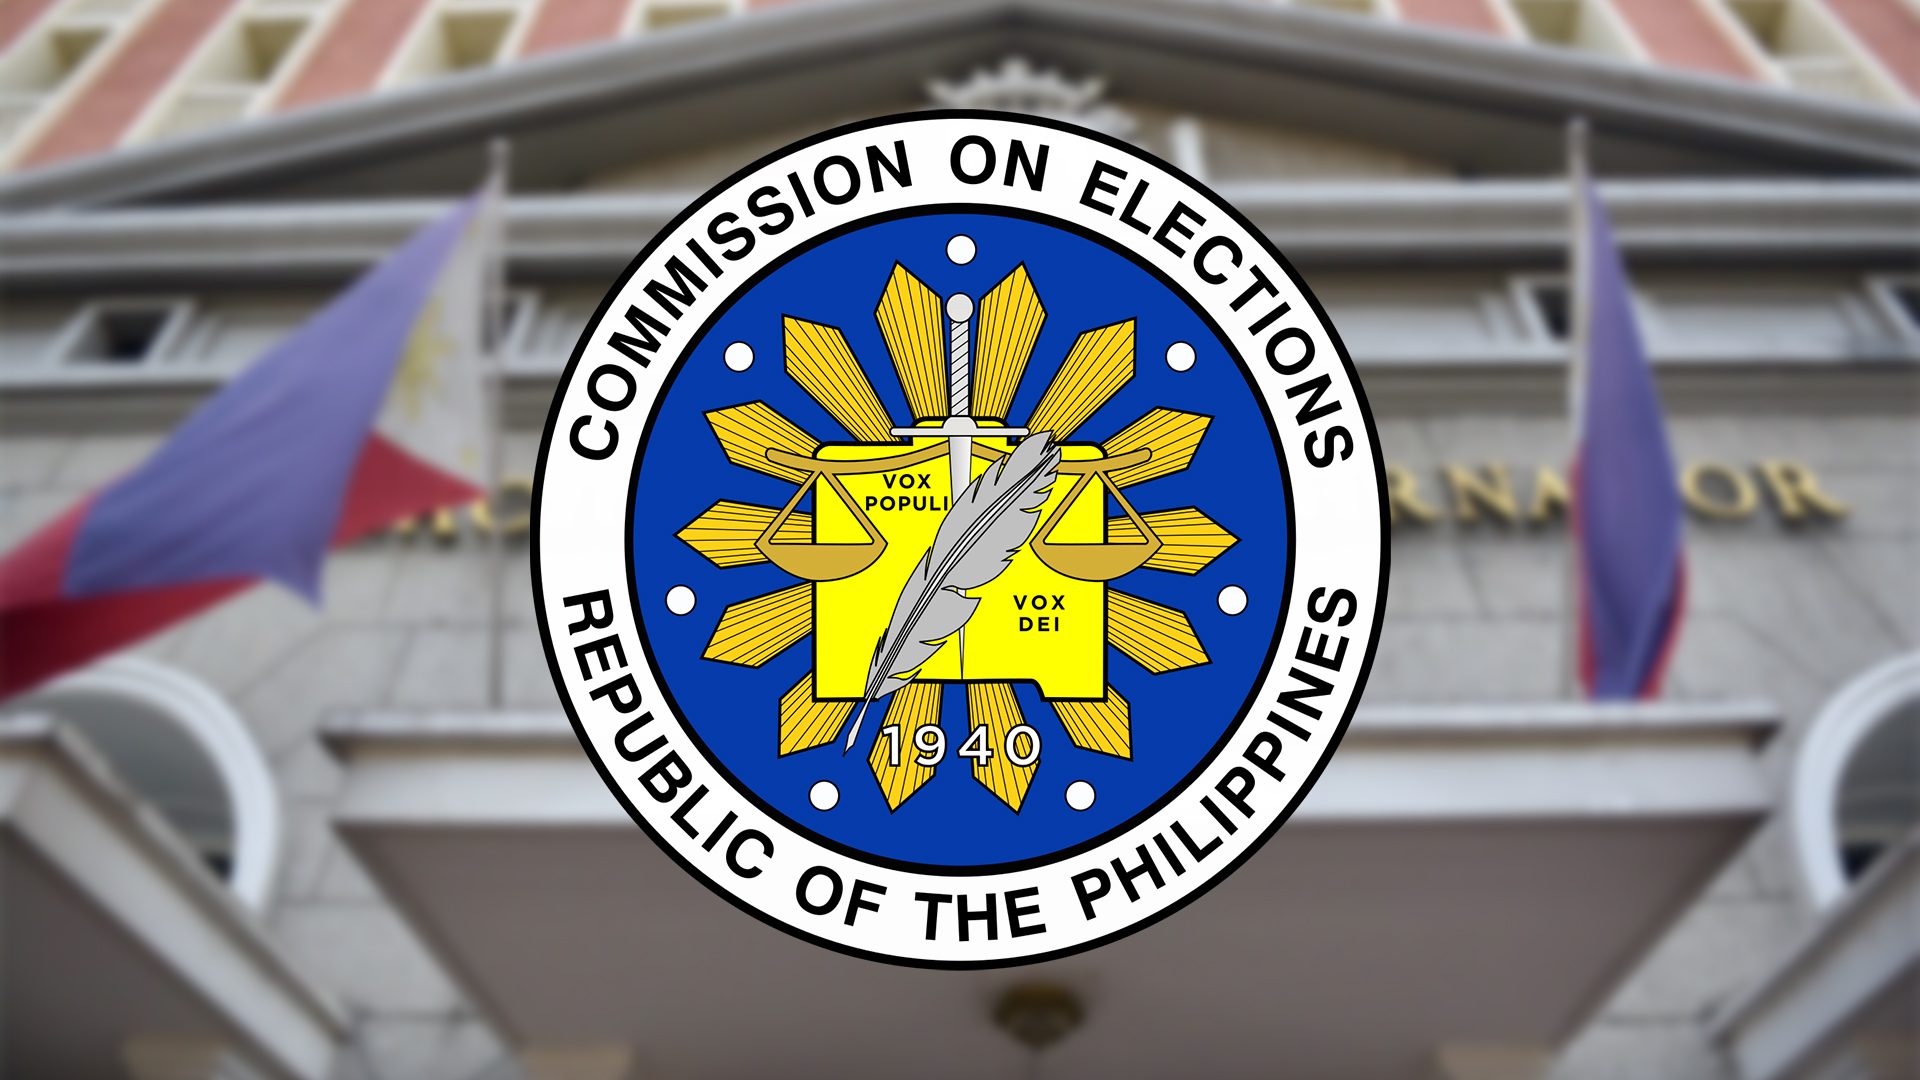 Candidacy filing for 2022 polls begins in pandemic-ravaged Philippines